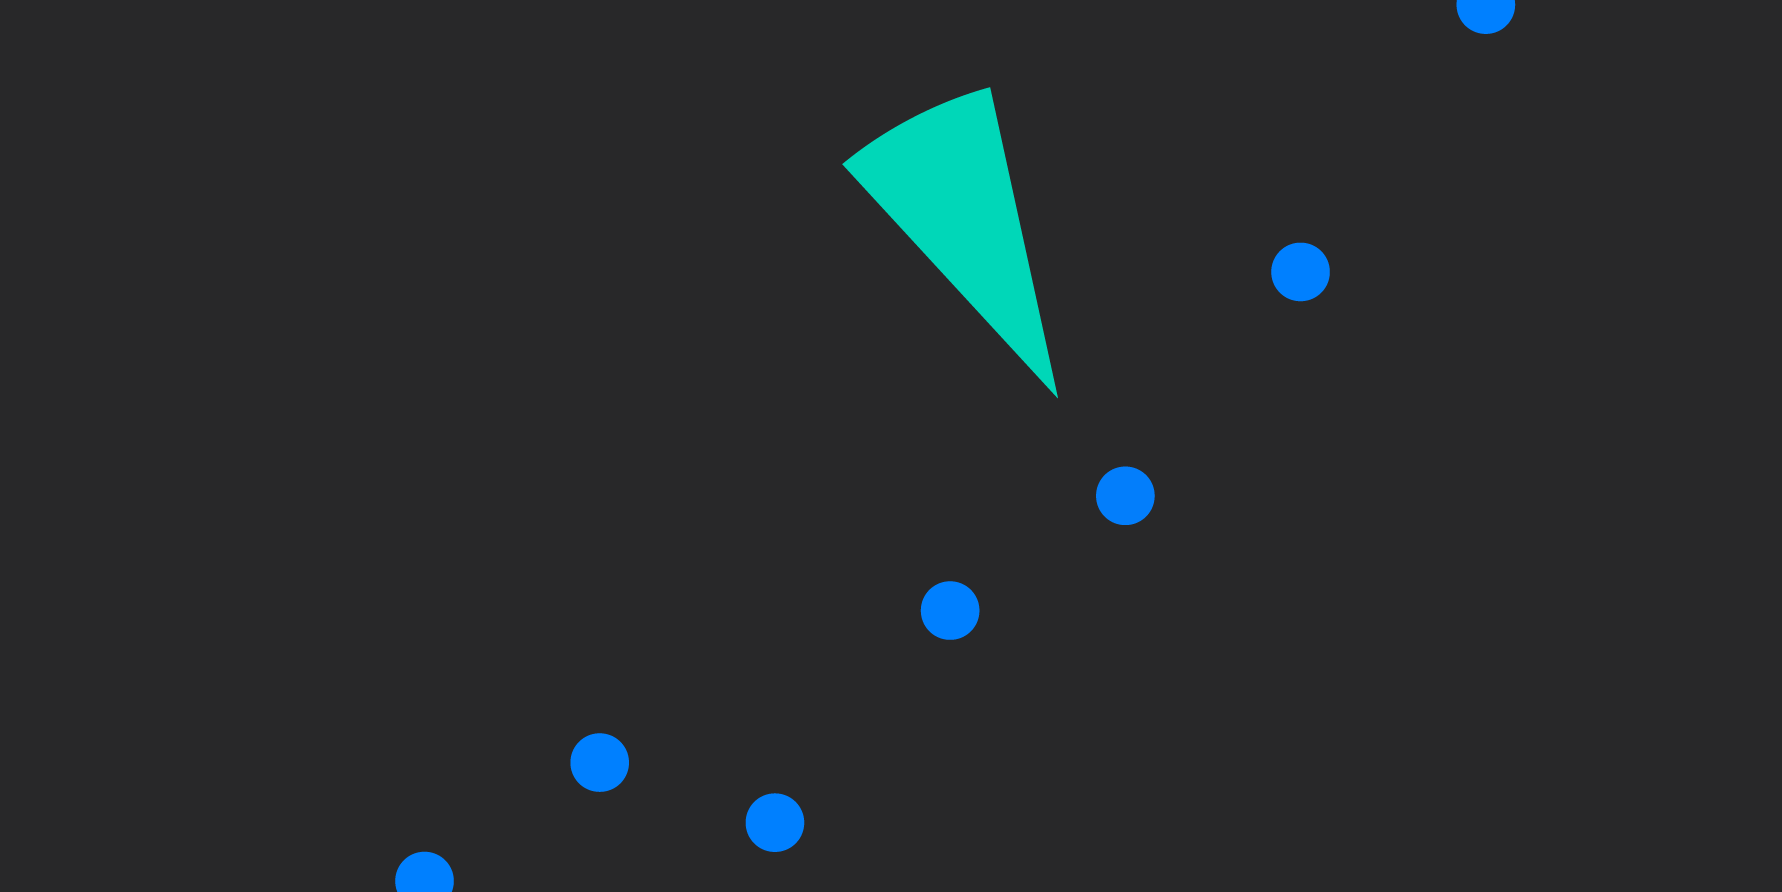 Illustration showing green triangle and blue dots trending upward on a black background